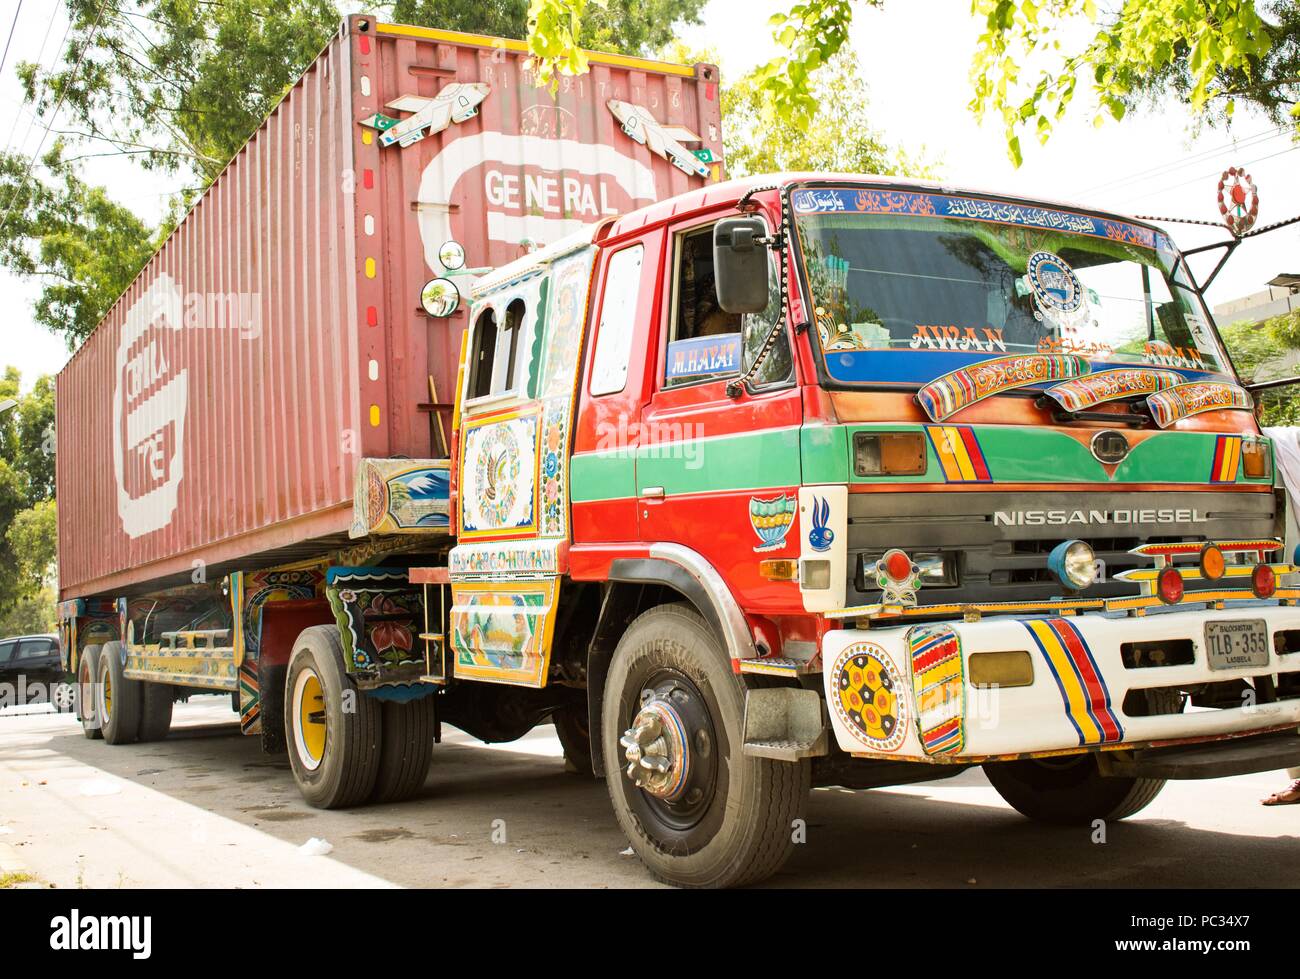 Local Transport Truck captured In Pakistan With Typical Designs Over it Stock Photo